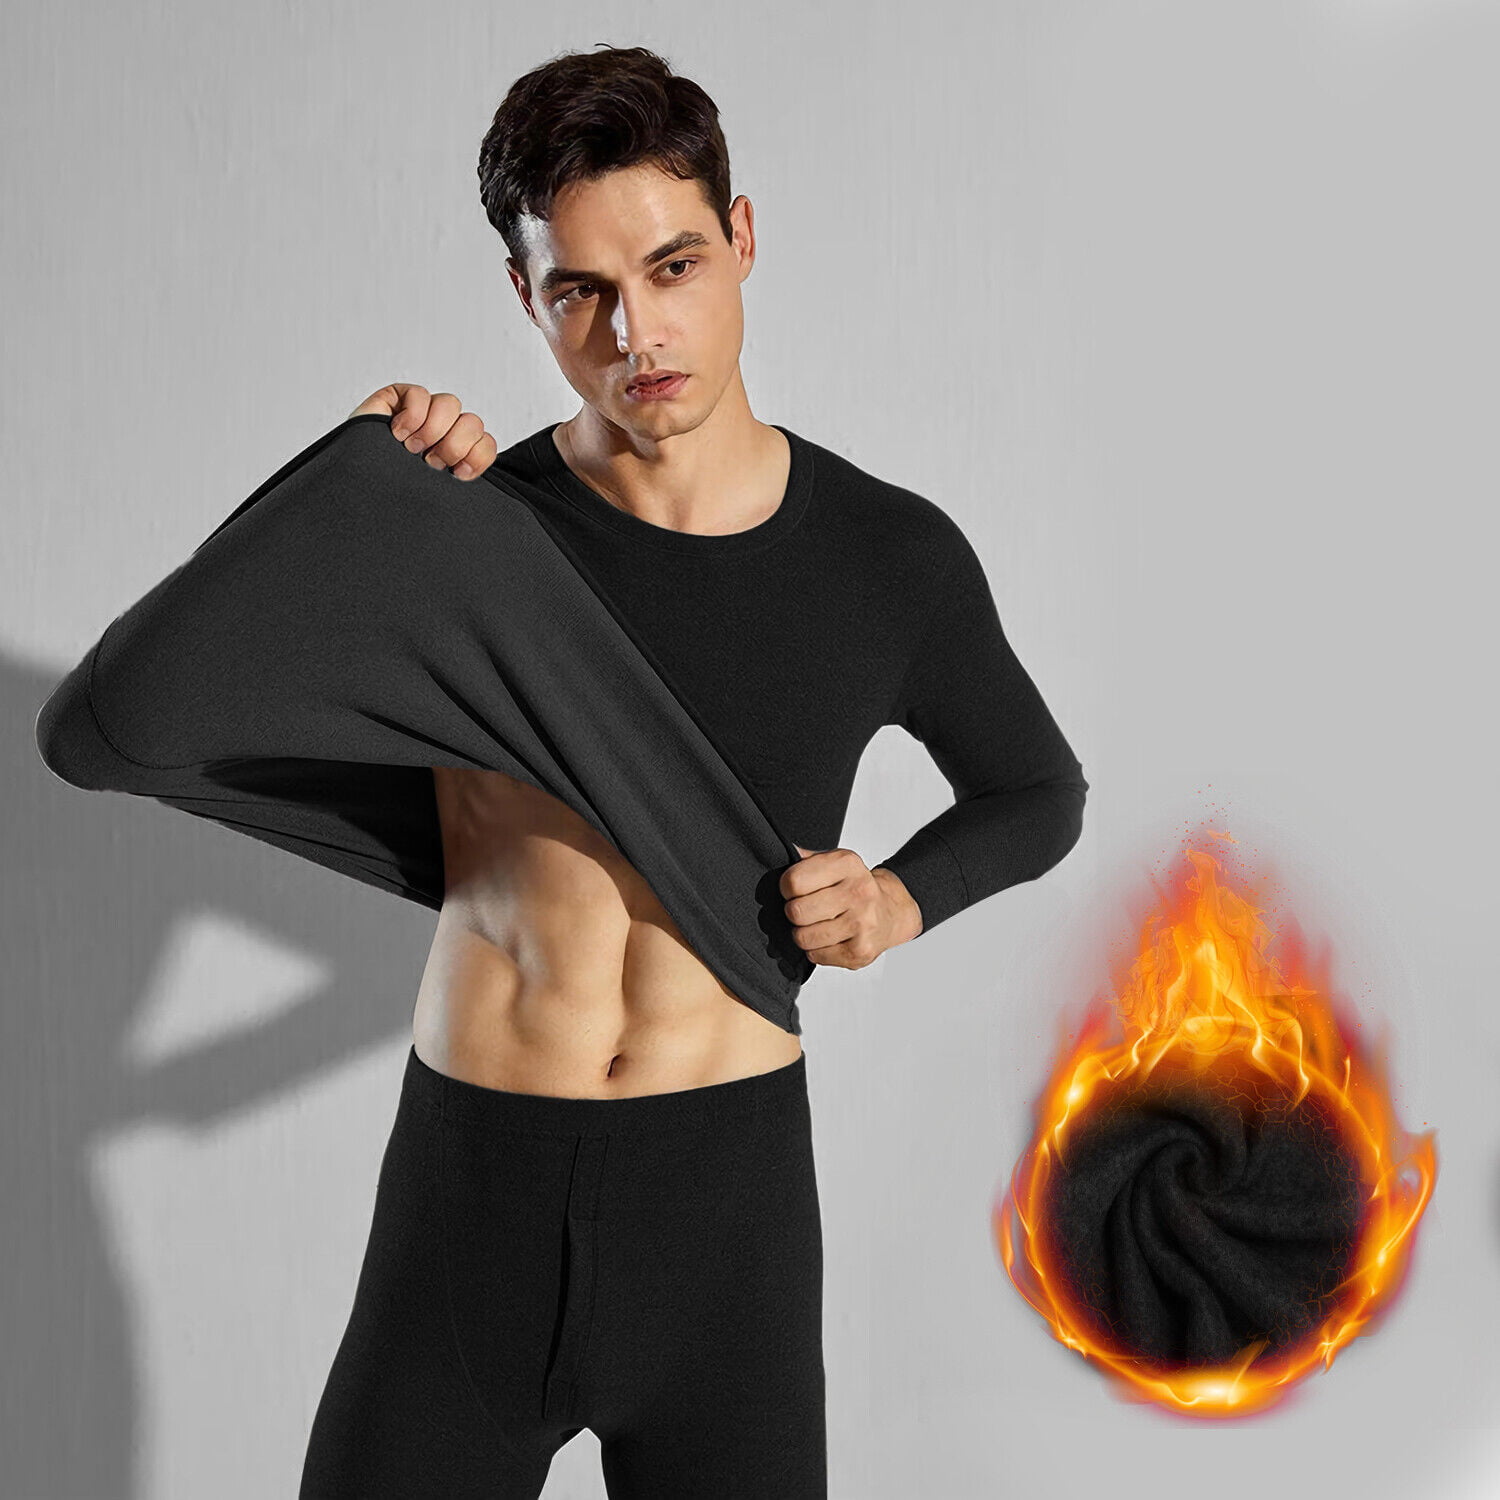 Top 5 Mens thermals - winter special, Best thermal tops for men